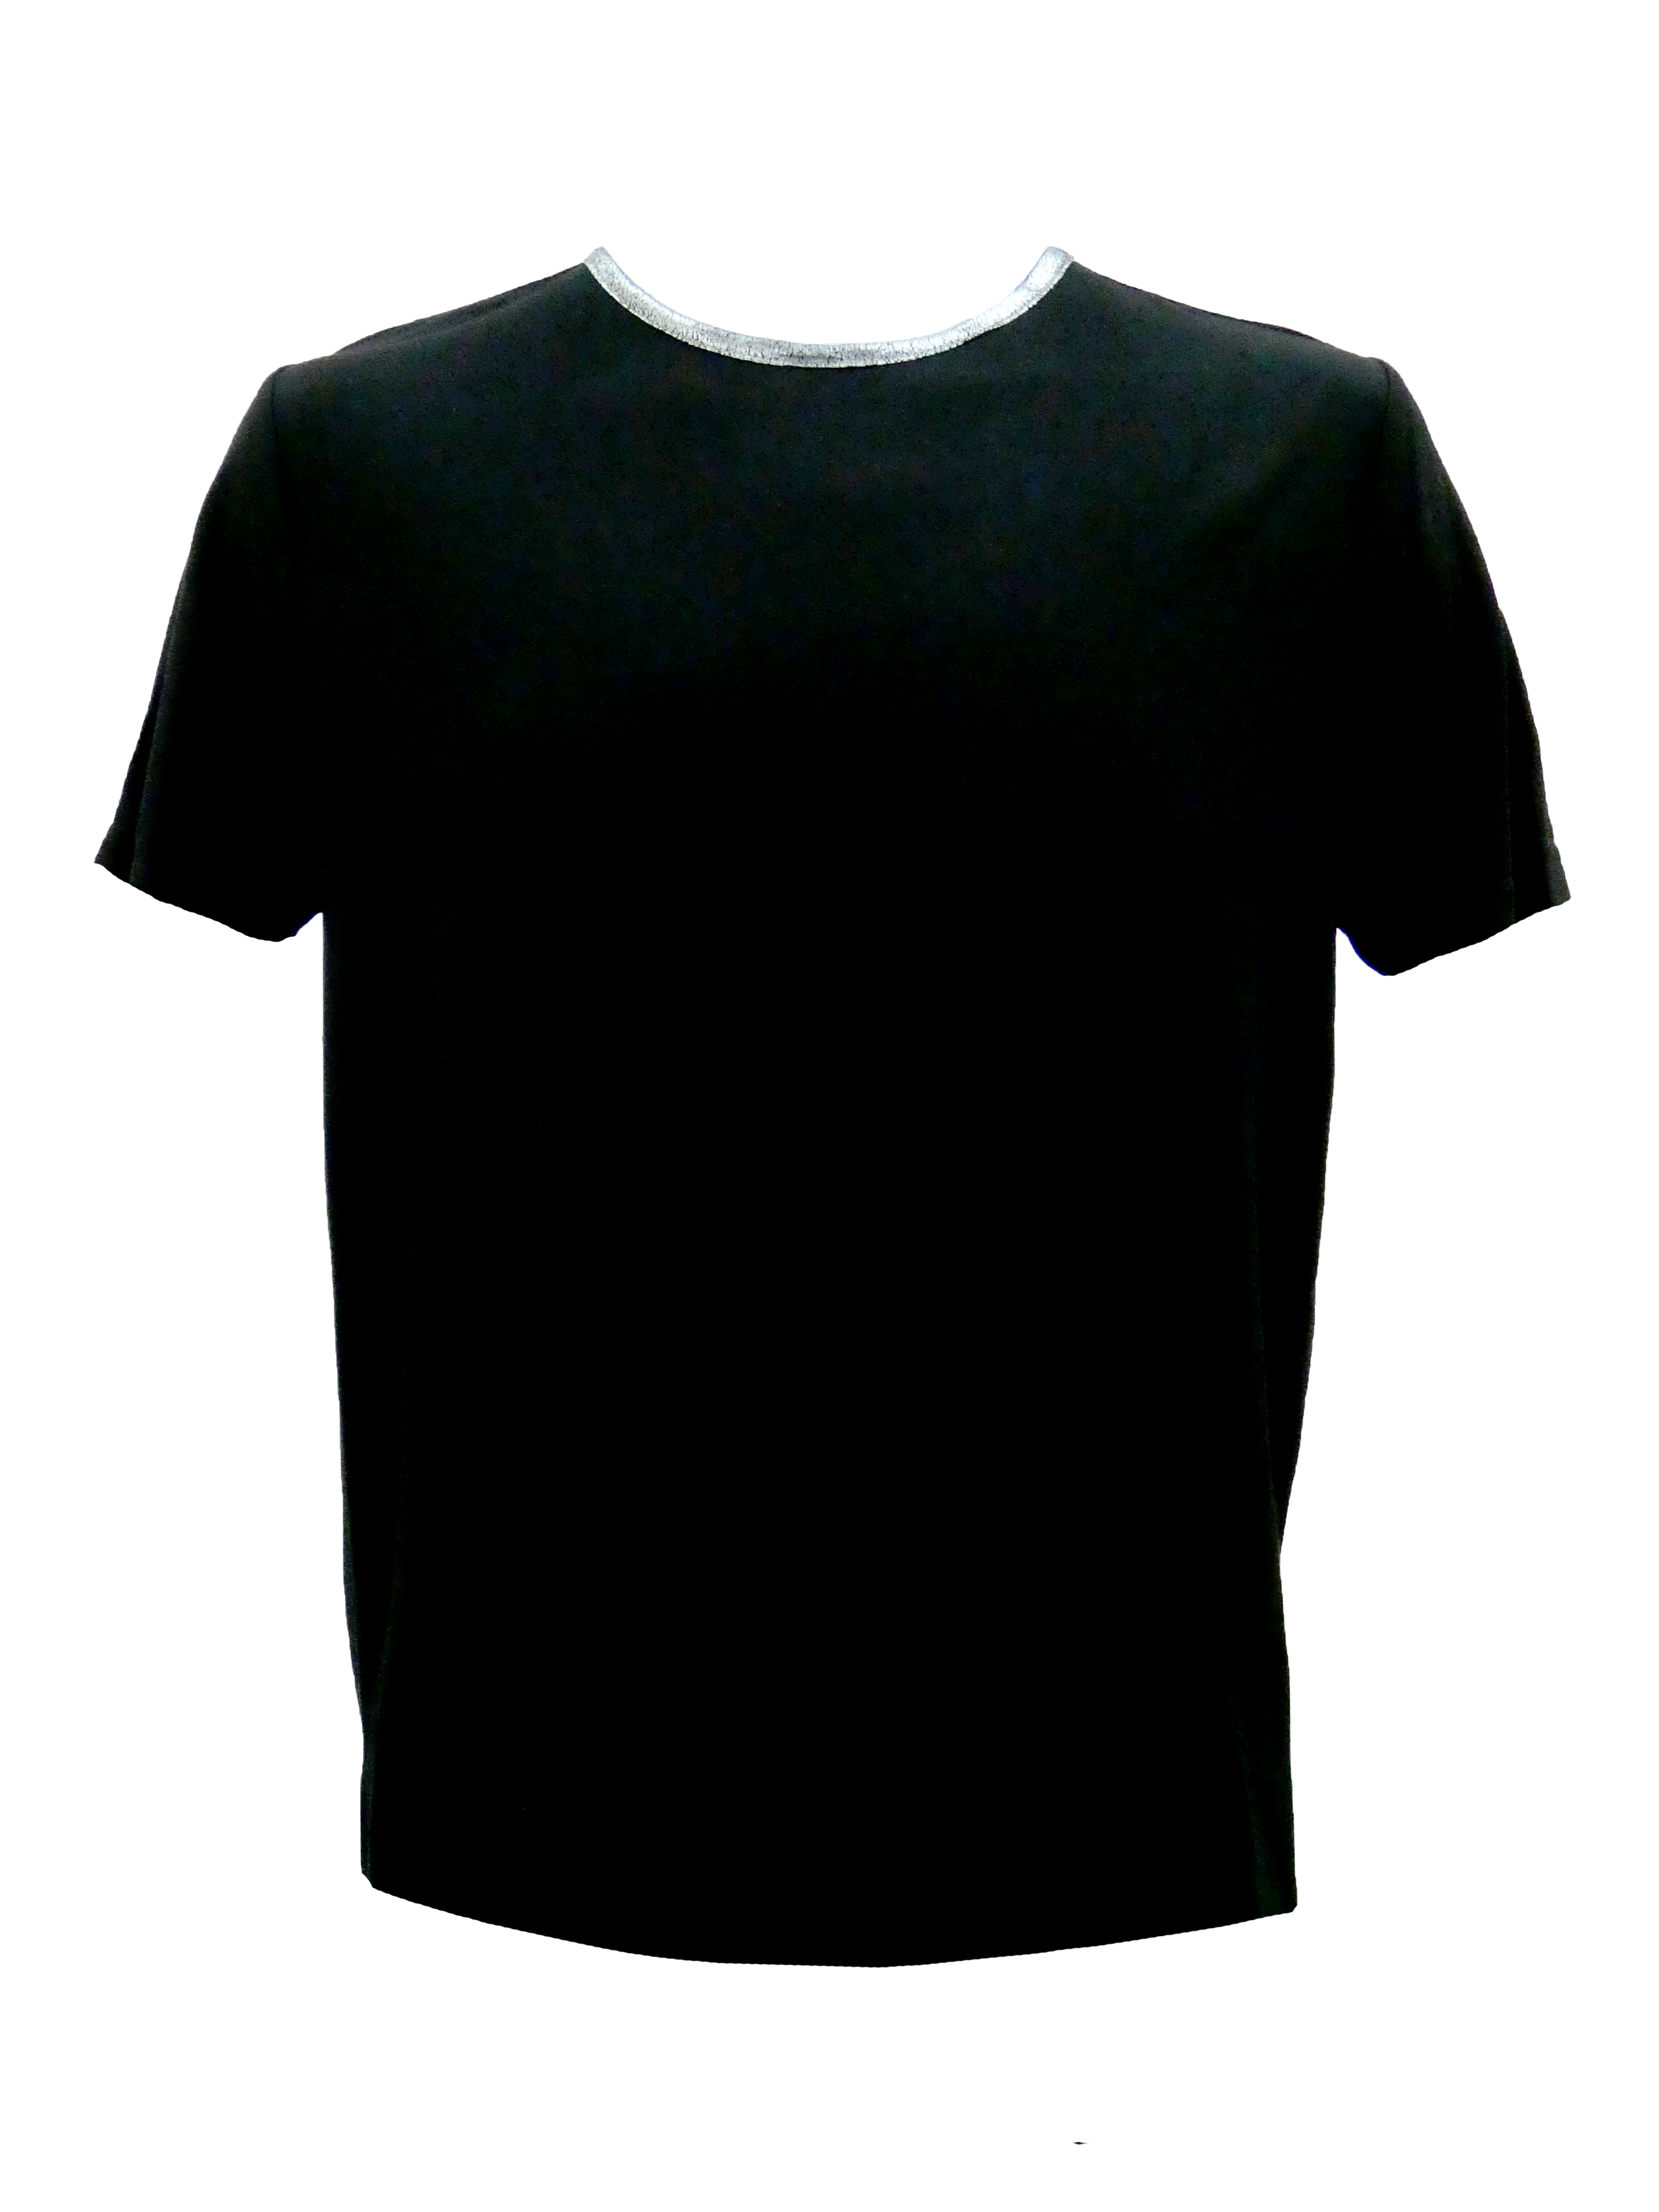 BLACK CREW NECK T-SHIRT WITH SILVER CONTRAST NECK RIB